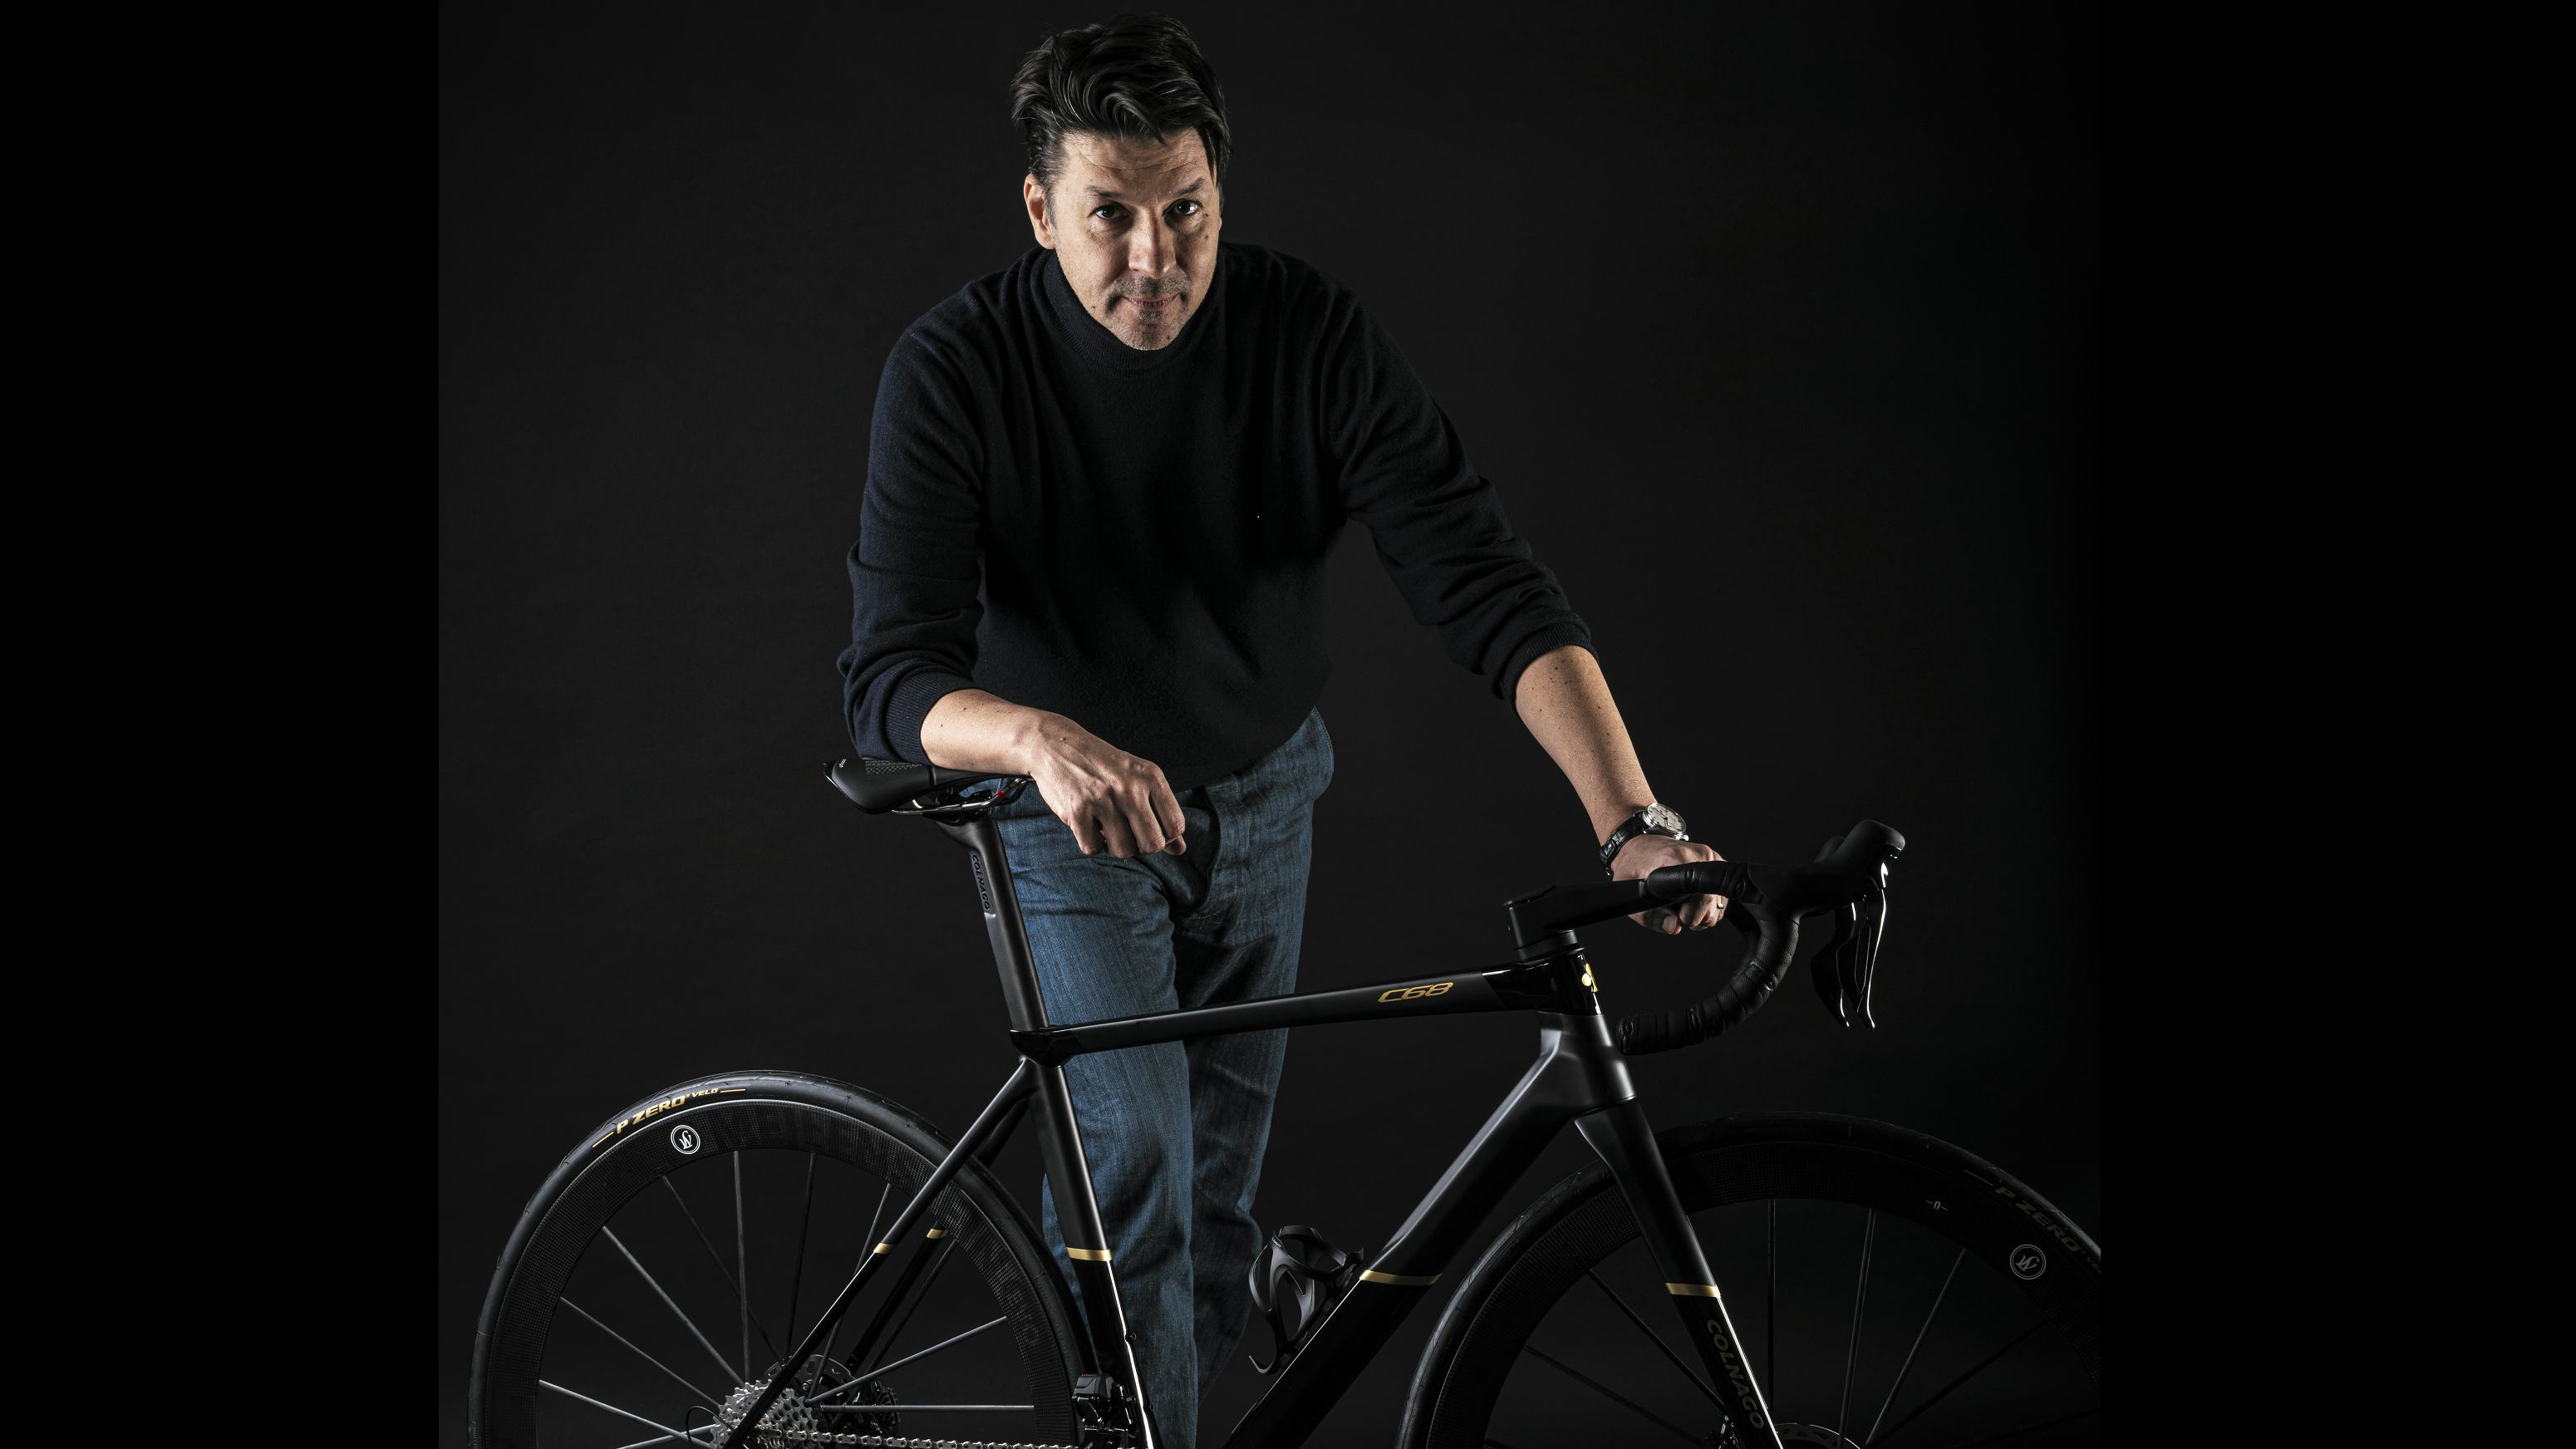 “Our mission is to be the most desirable bicycle brand in the world,” commented Nicola Rosin, CEO of Colnago. – Photo Colnago